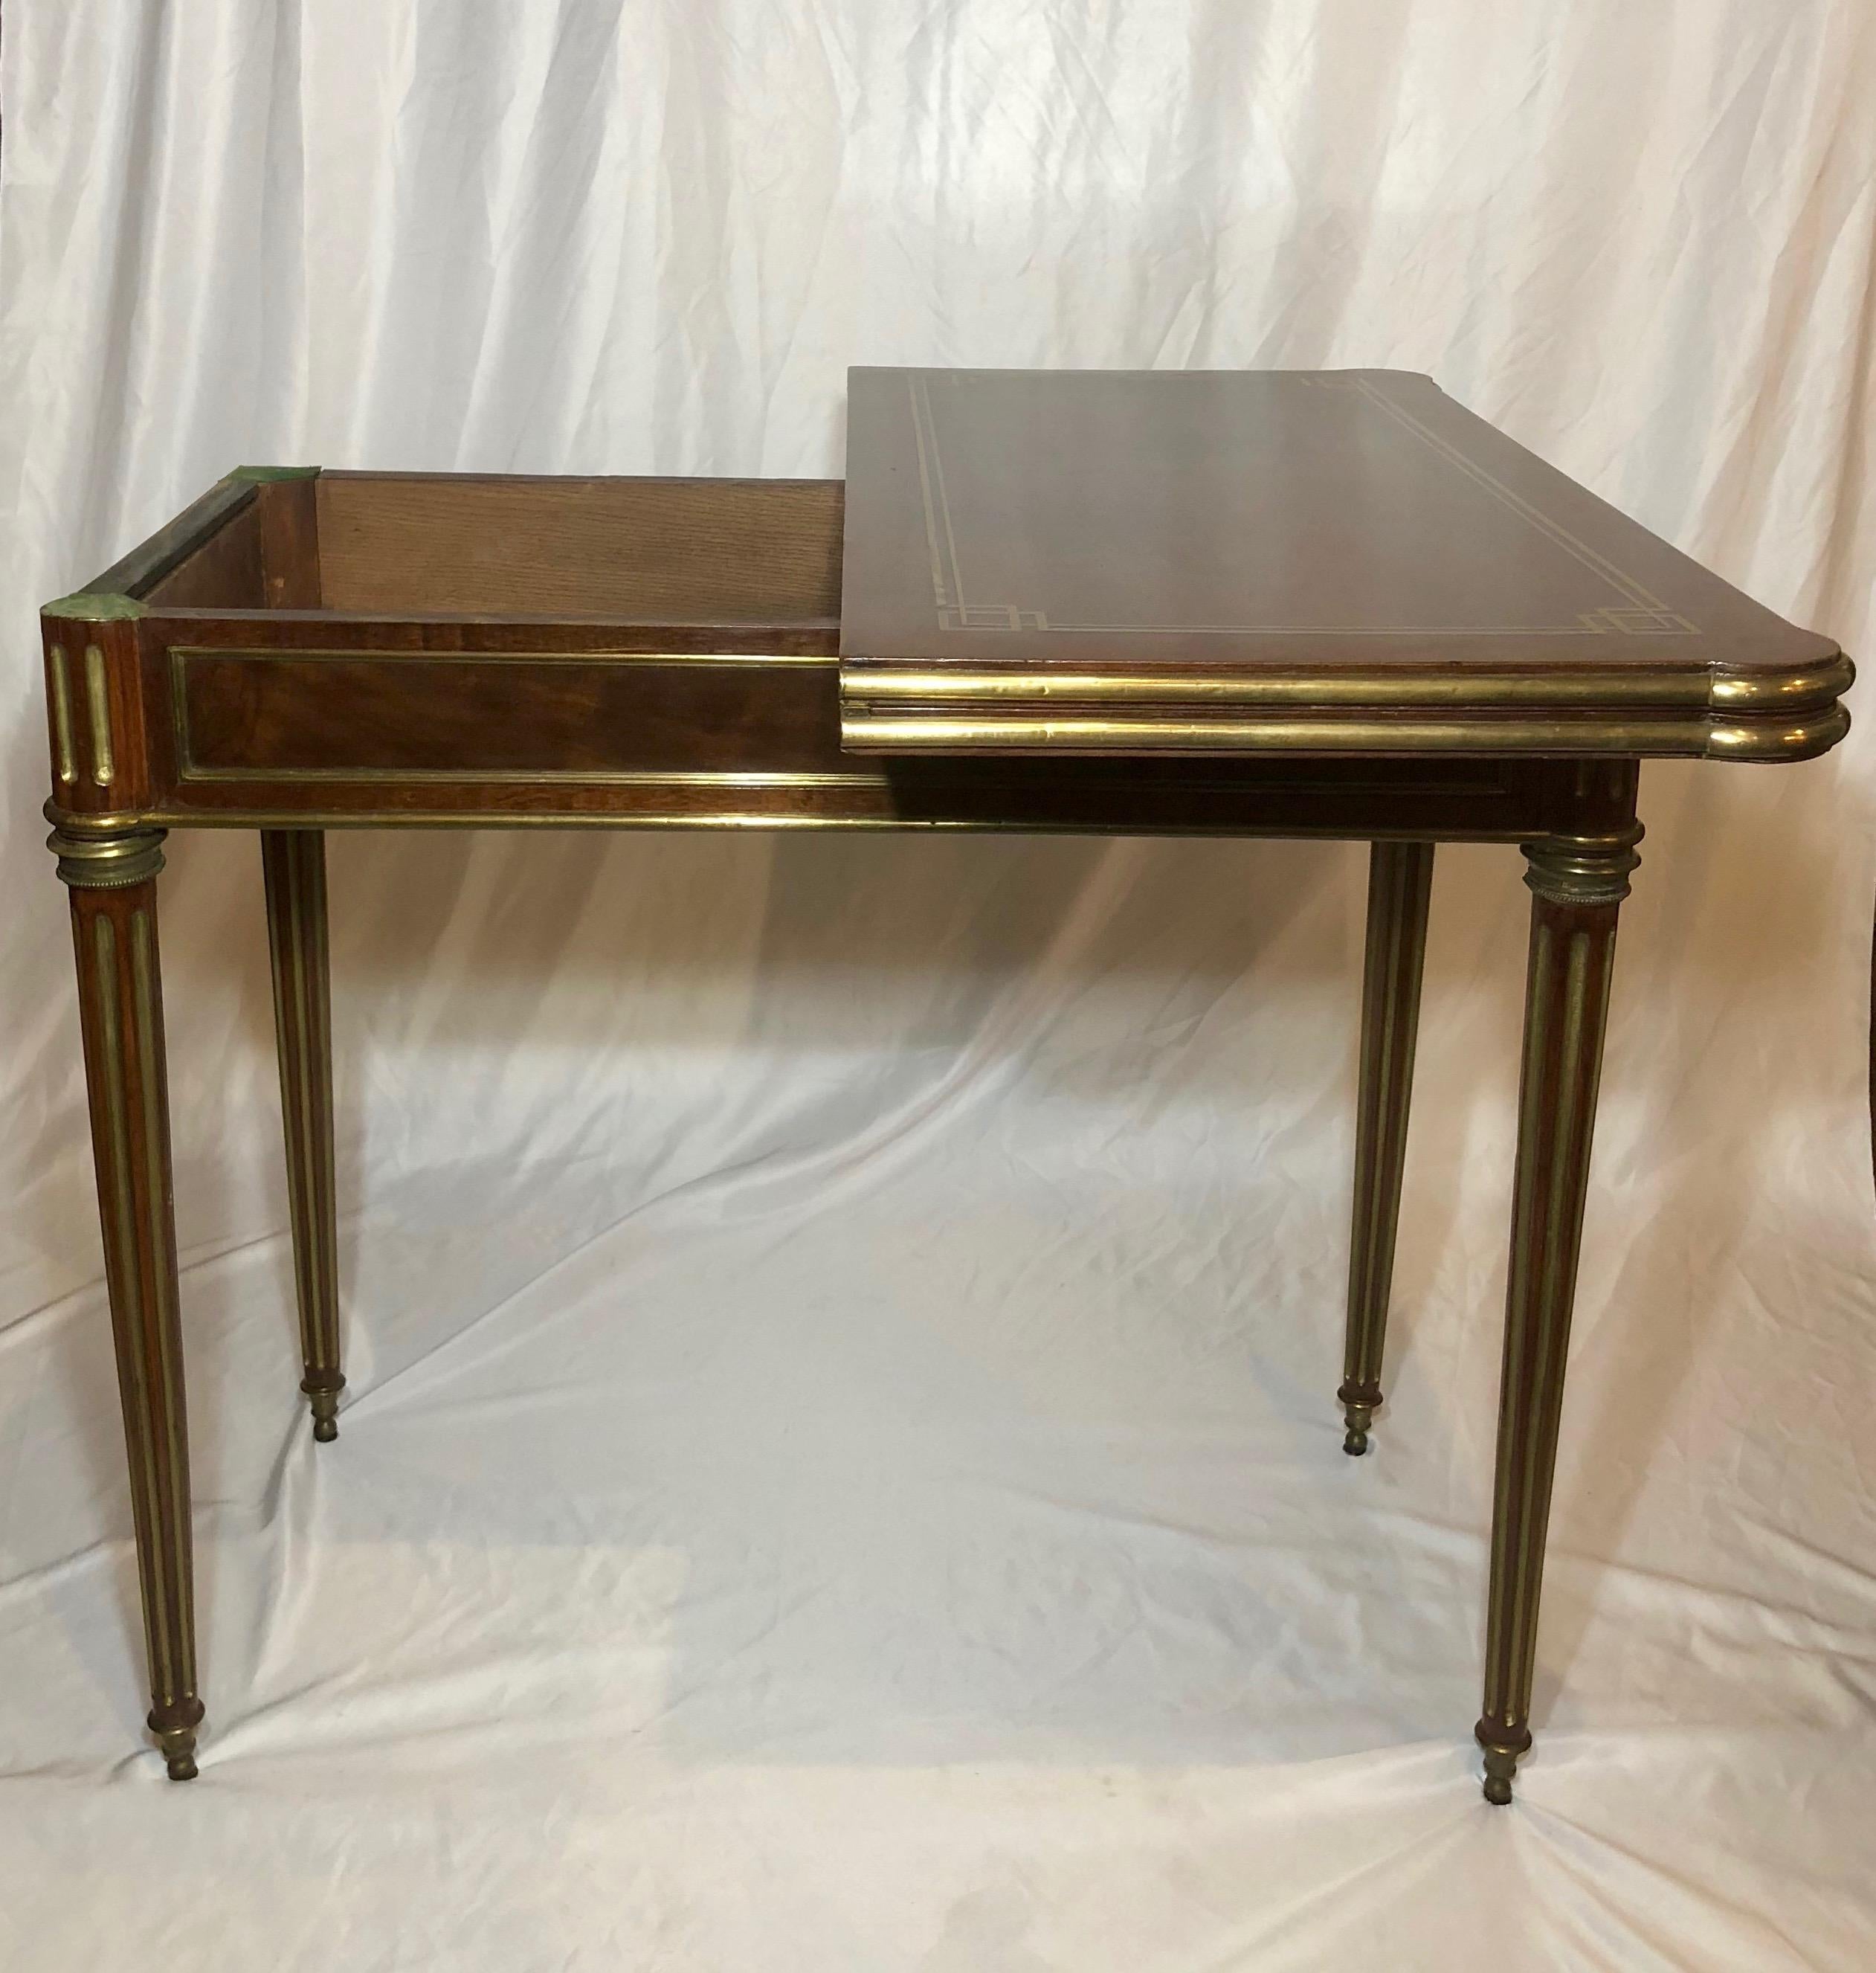 Antique French mahogany games table with brass mounts, circa 1870-1880.